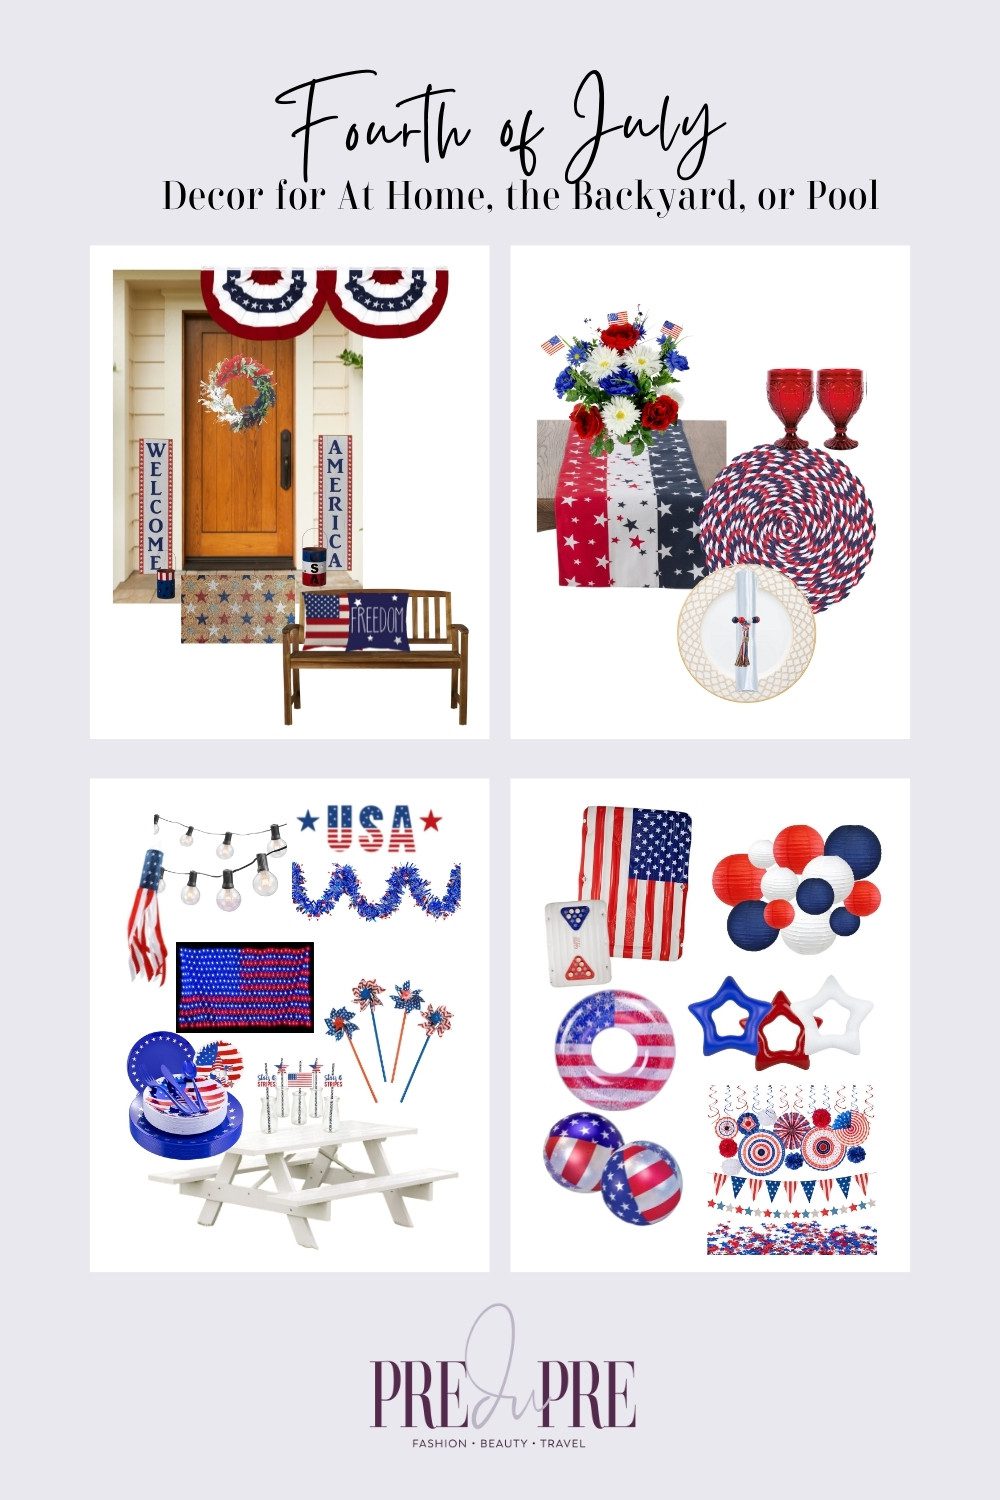 Collage of Fourth of July Decorations for the front porch, inside at home, the backyard, or pool.